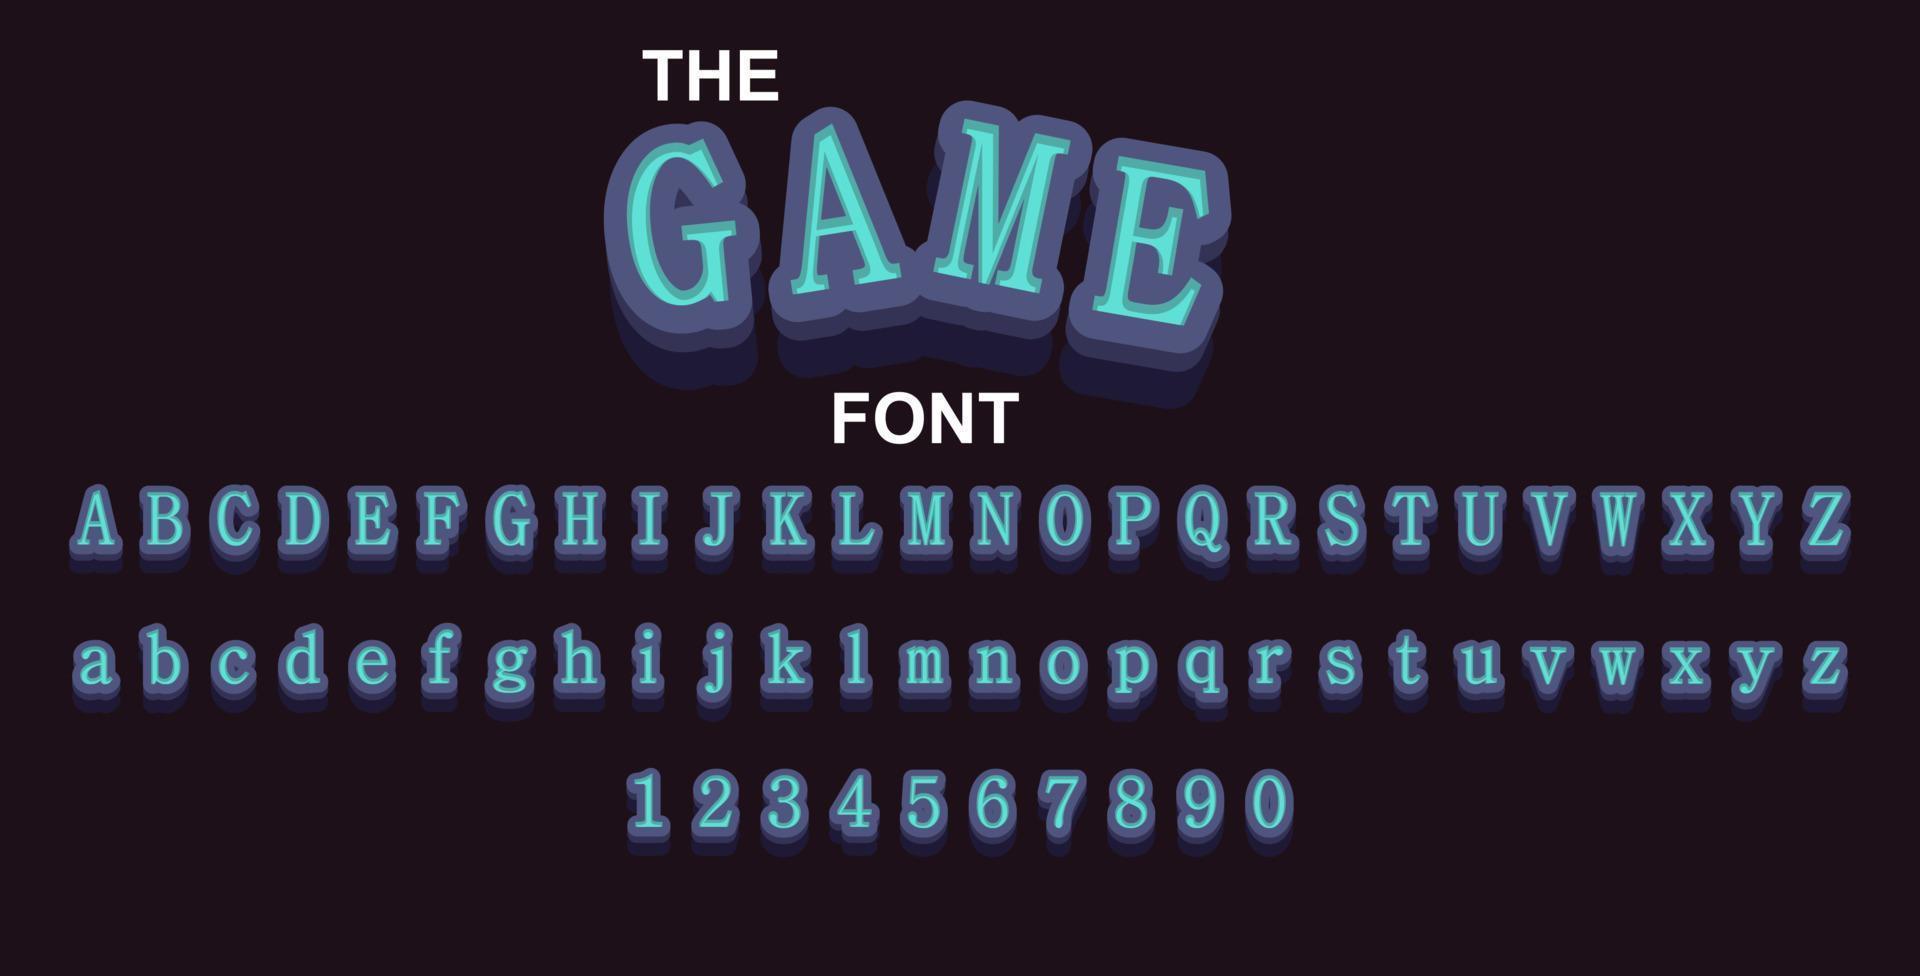 Game font and alphabet with numbers. Vector typography letter design.